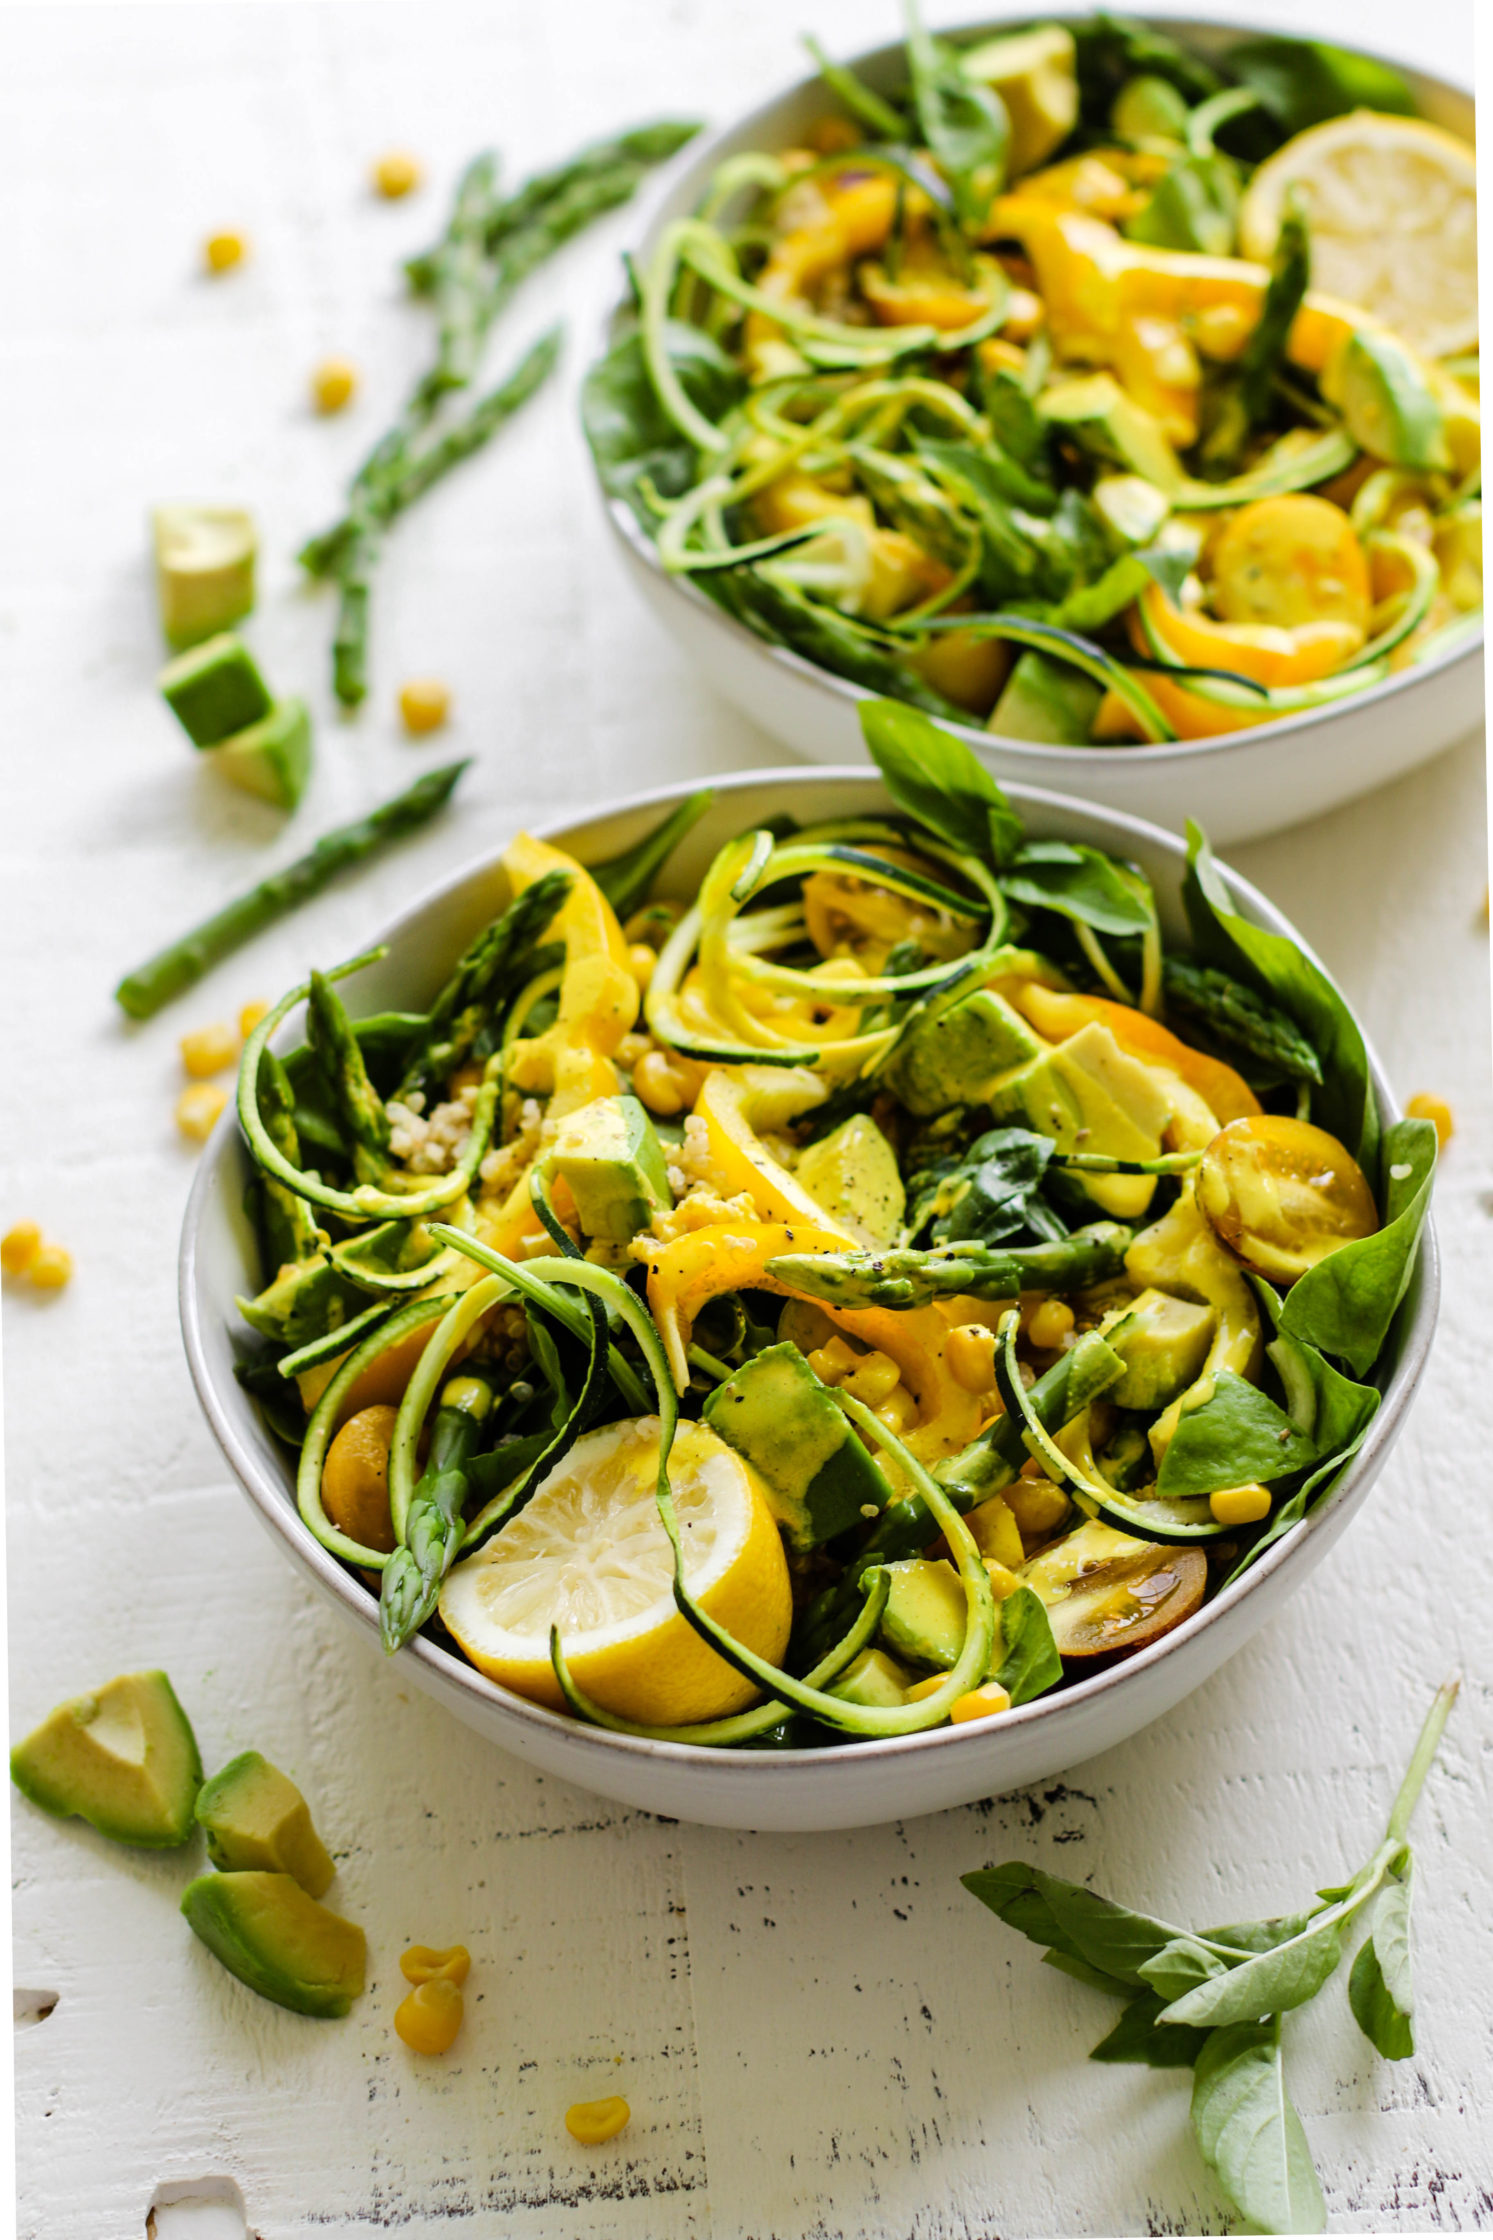 Summer Spinach Salad with Turmeric Tahini Dressing by Flora & Vino